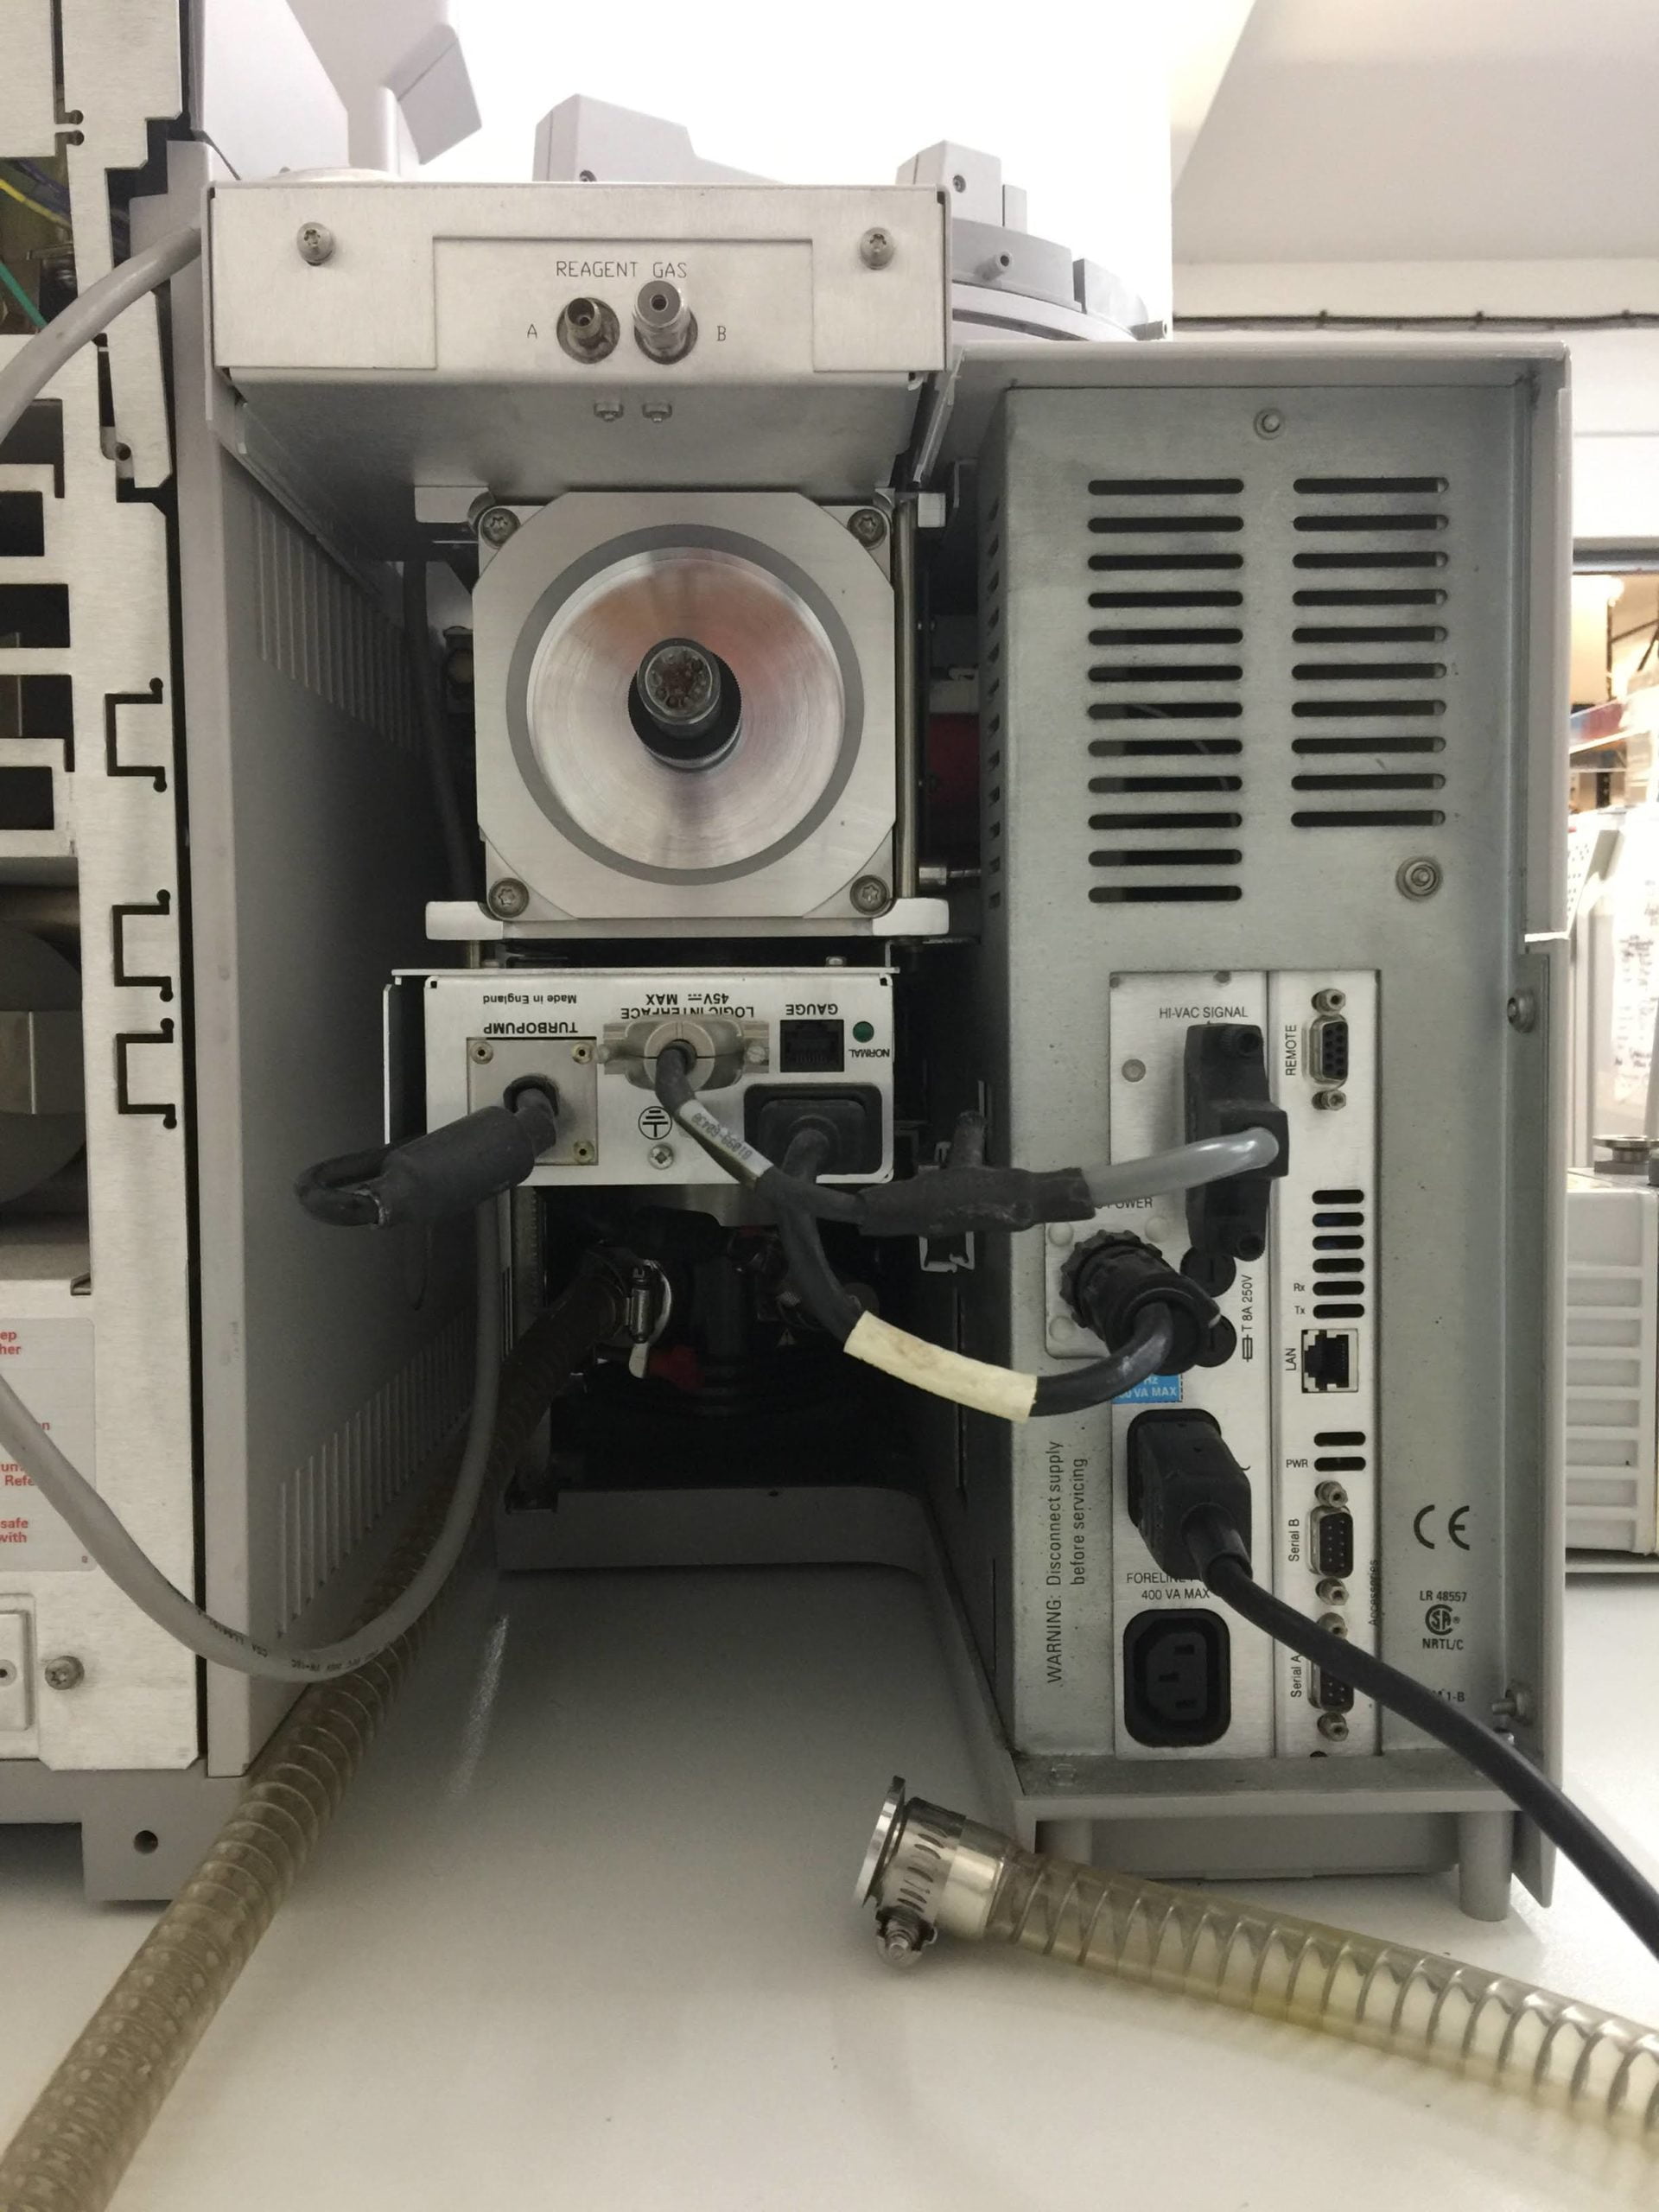 agilent hp 6890 series gas chromatograph system, 5973 mass selective detector and 7683 series injector